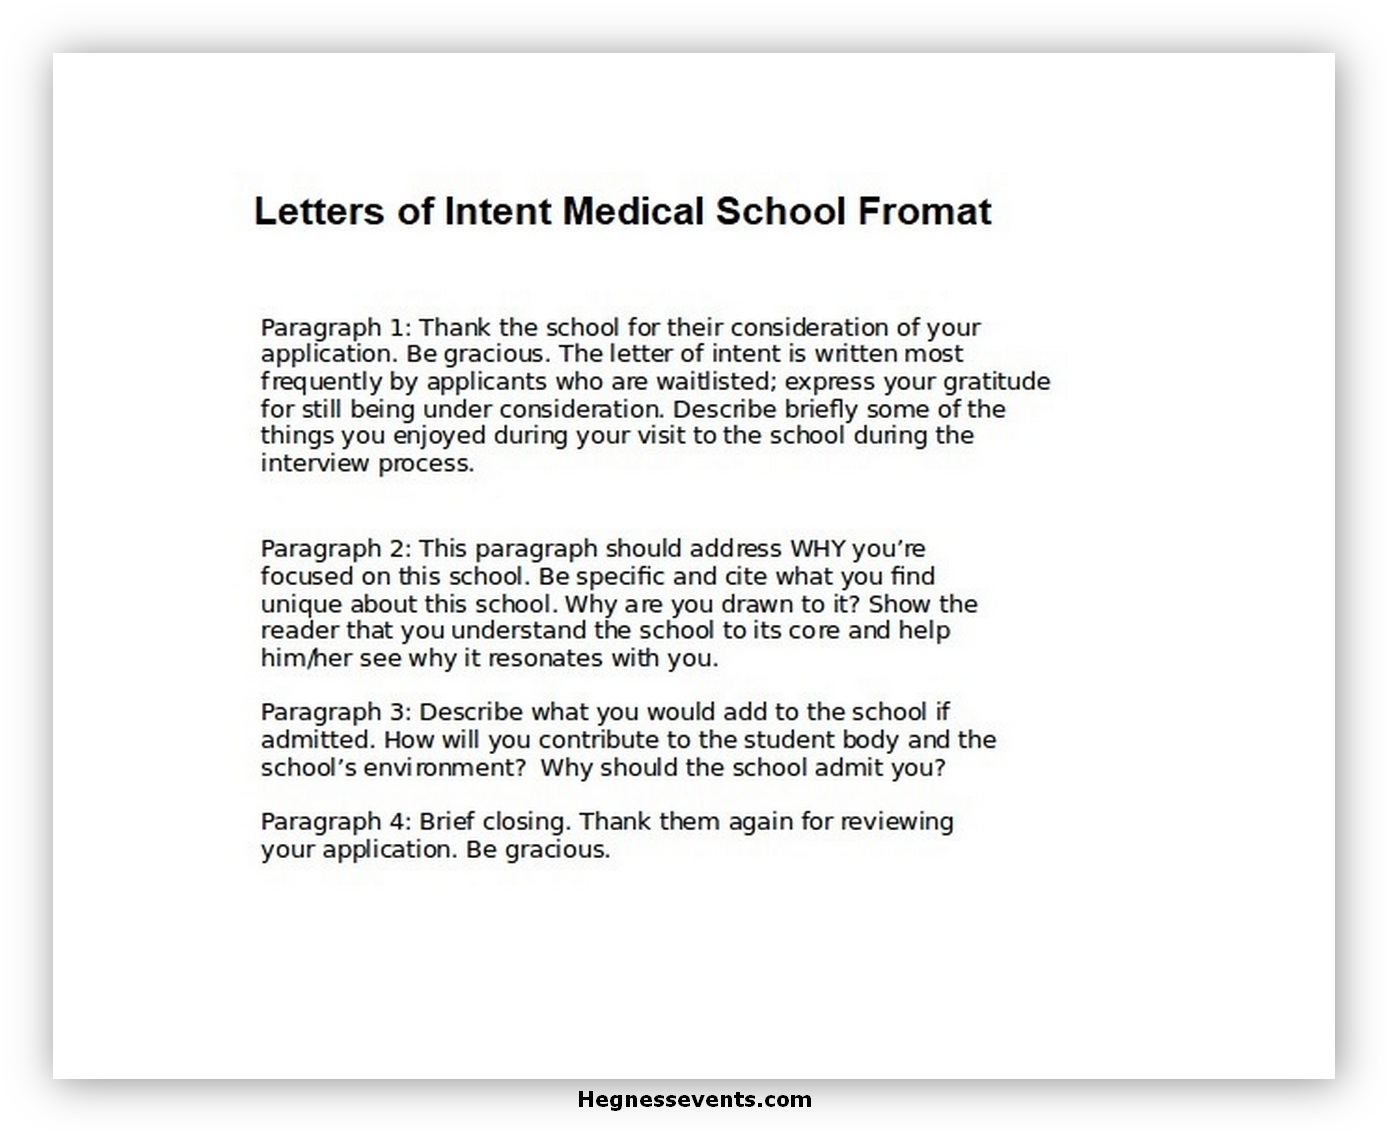 Letters of Intent Medical School 06